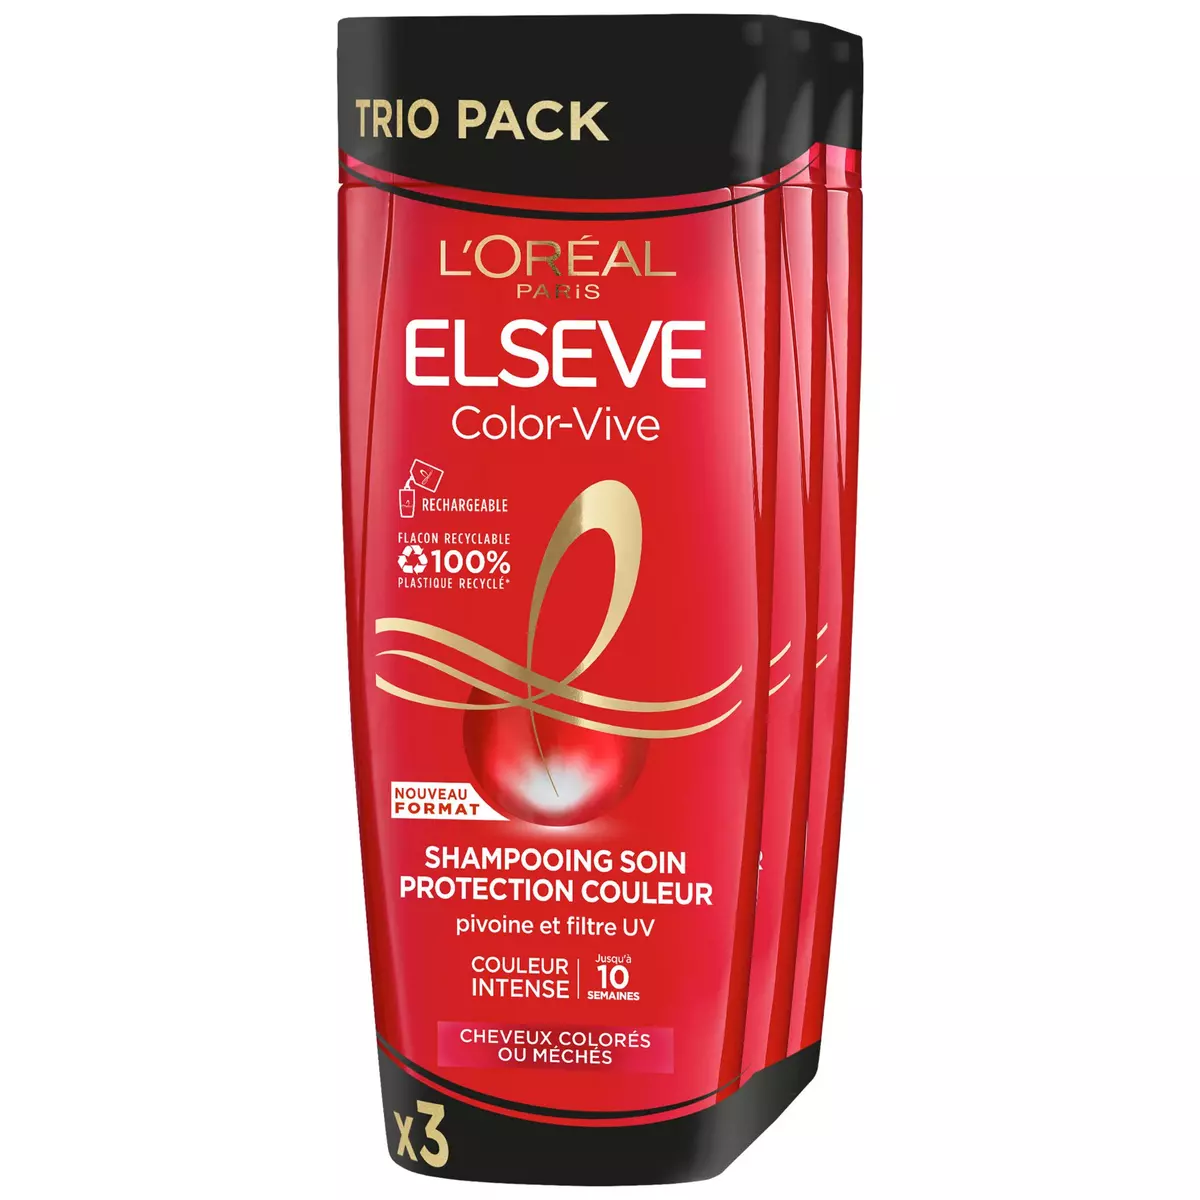 ELSEVE Shampooing soin protection couleur 3x350ml